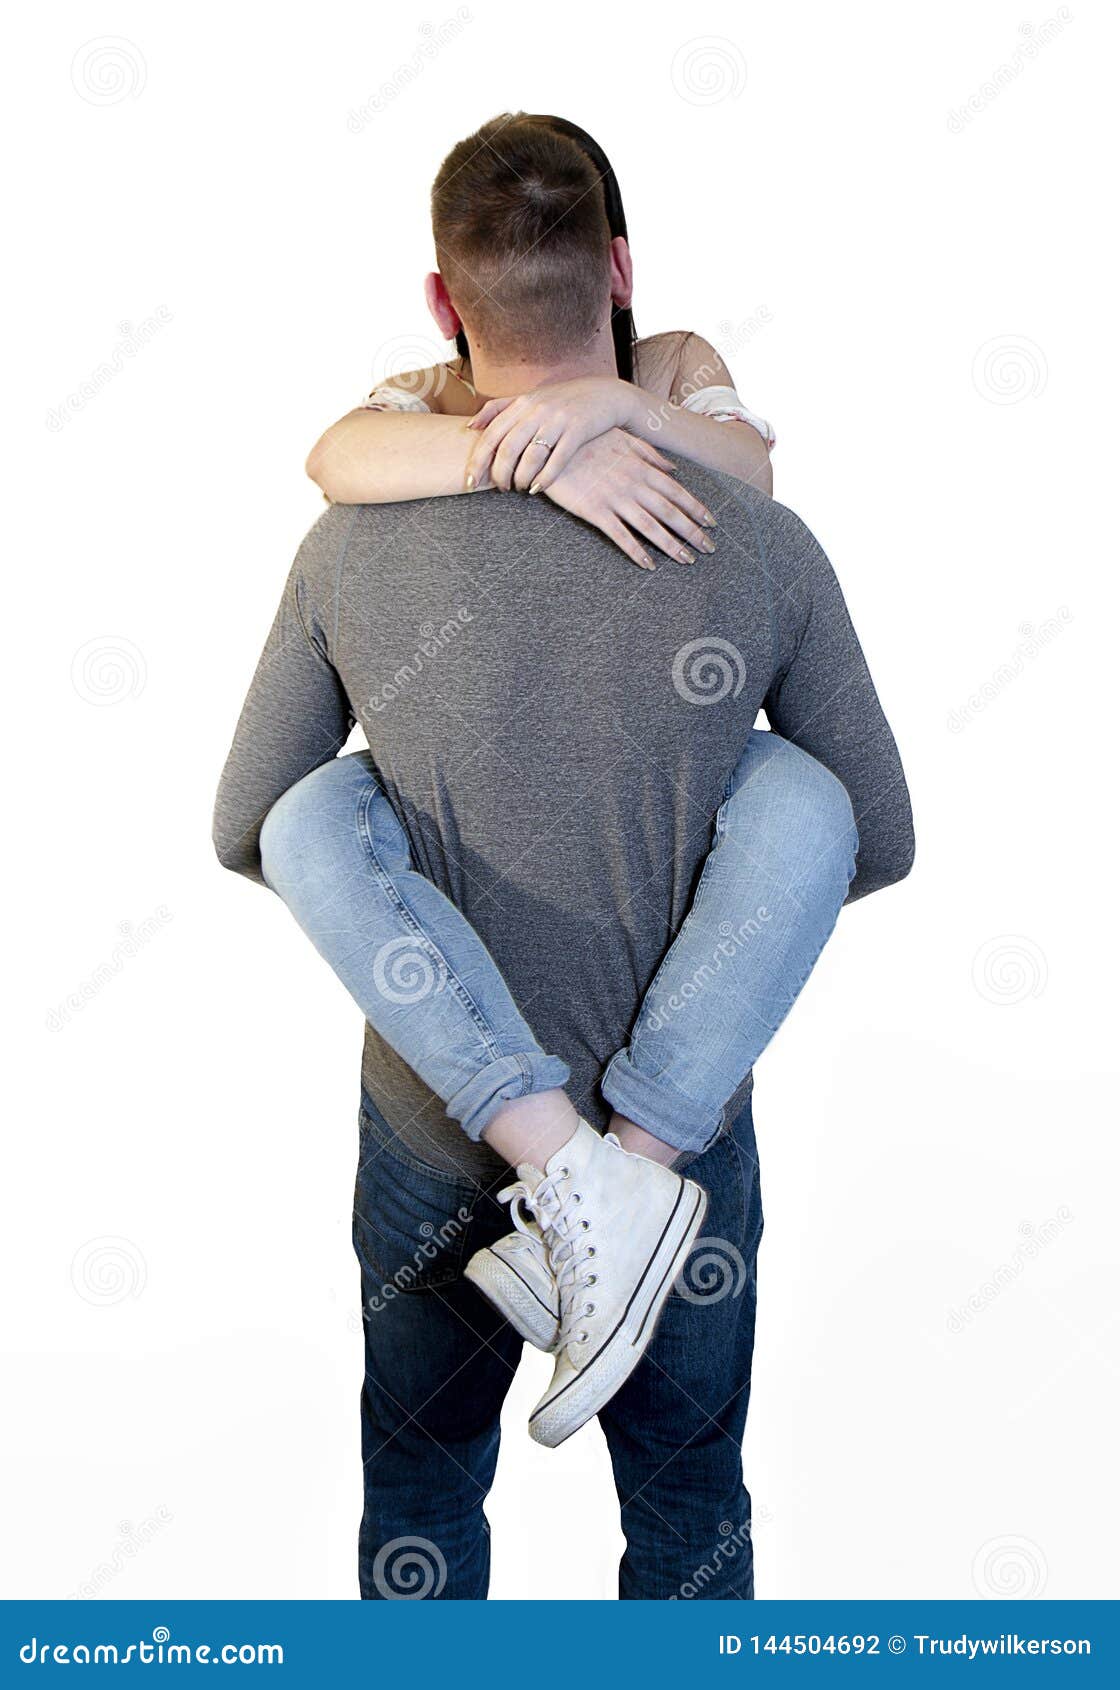 indarbejde pistol Hæl Playful Couple with Young Woman Wrapped Around Boyfriend`s Waist. Isolated  on White Stock Photo - Image of young, jeans: 144504692